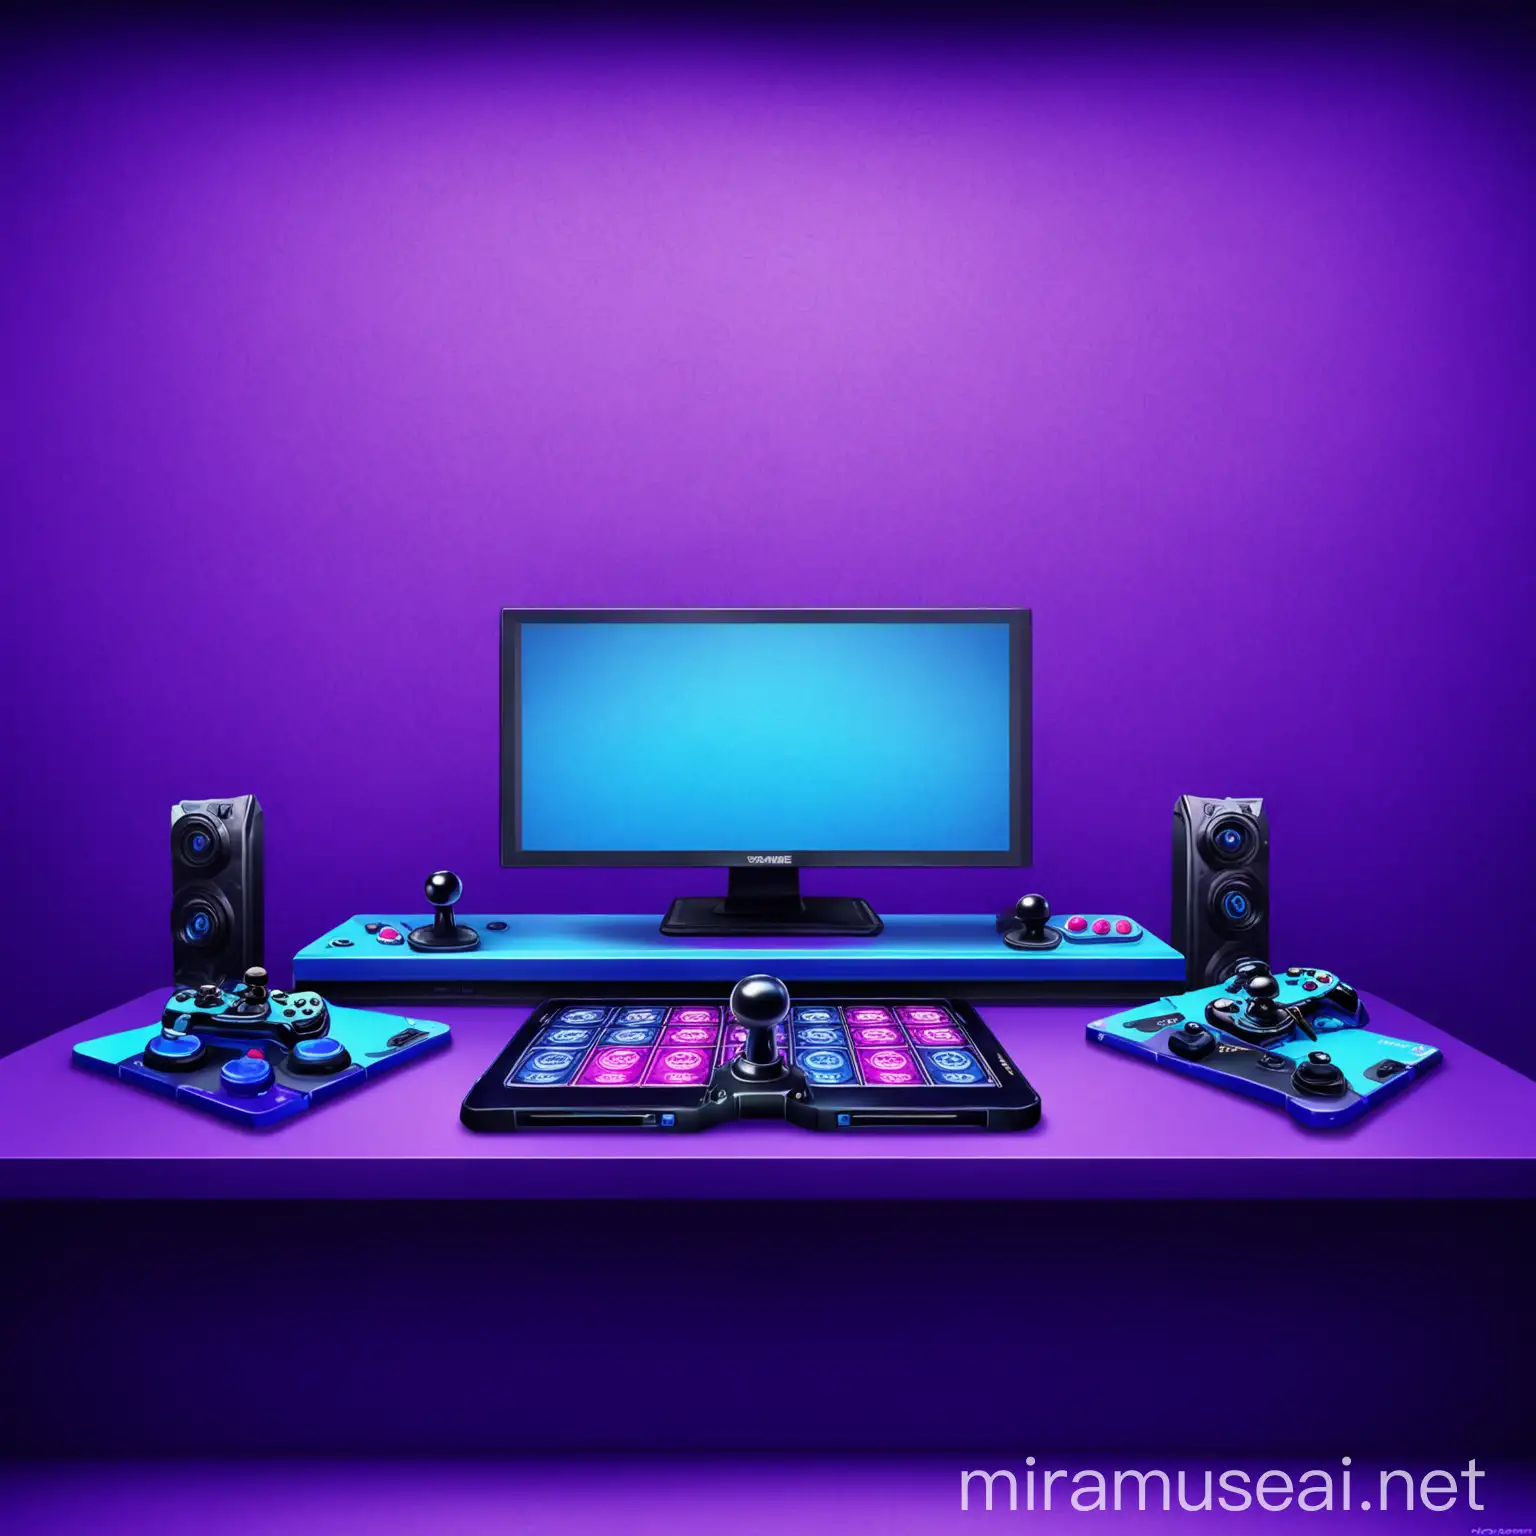 WeGame Online Gaming with a Purple and Blue Backdrop